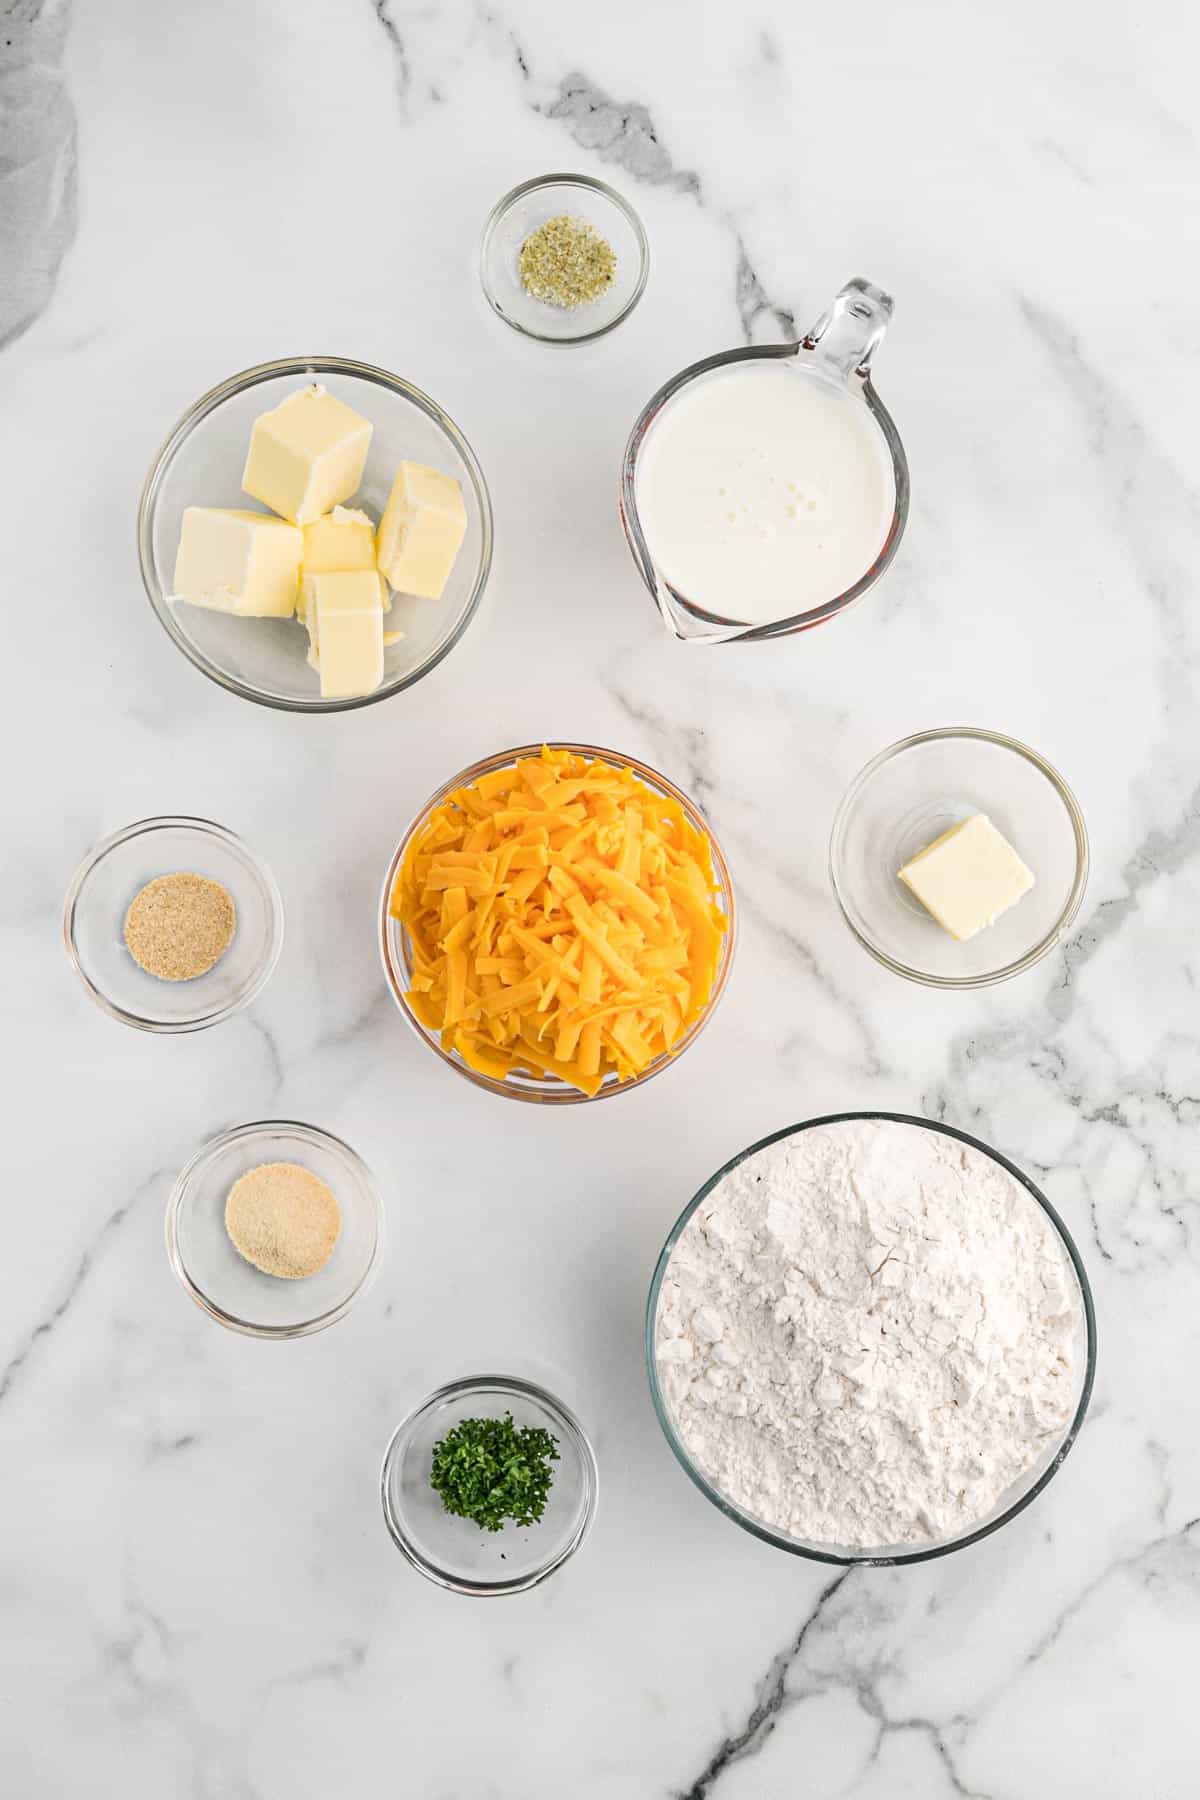 Ingredients to make copycat cheddar bay biscuits on the table ready to mix up.